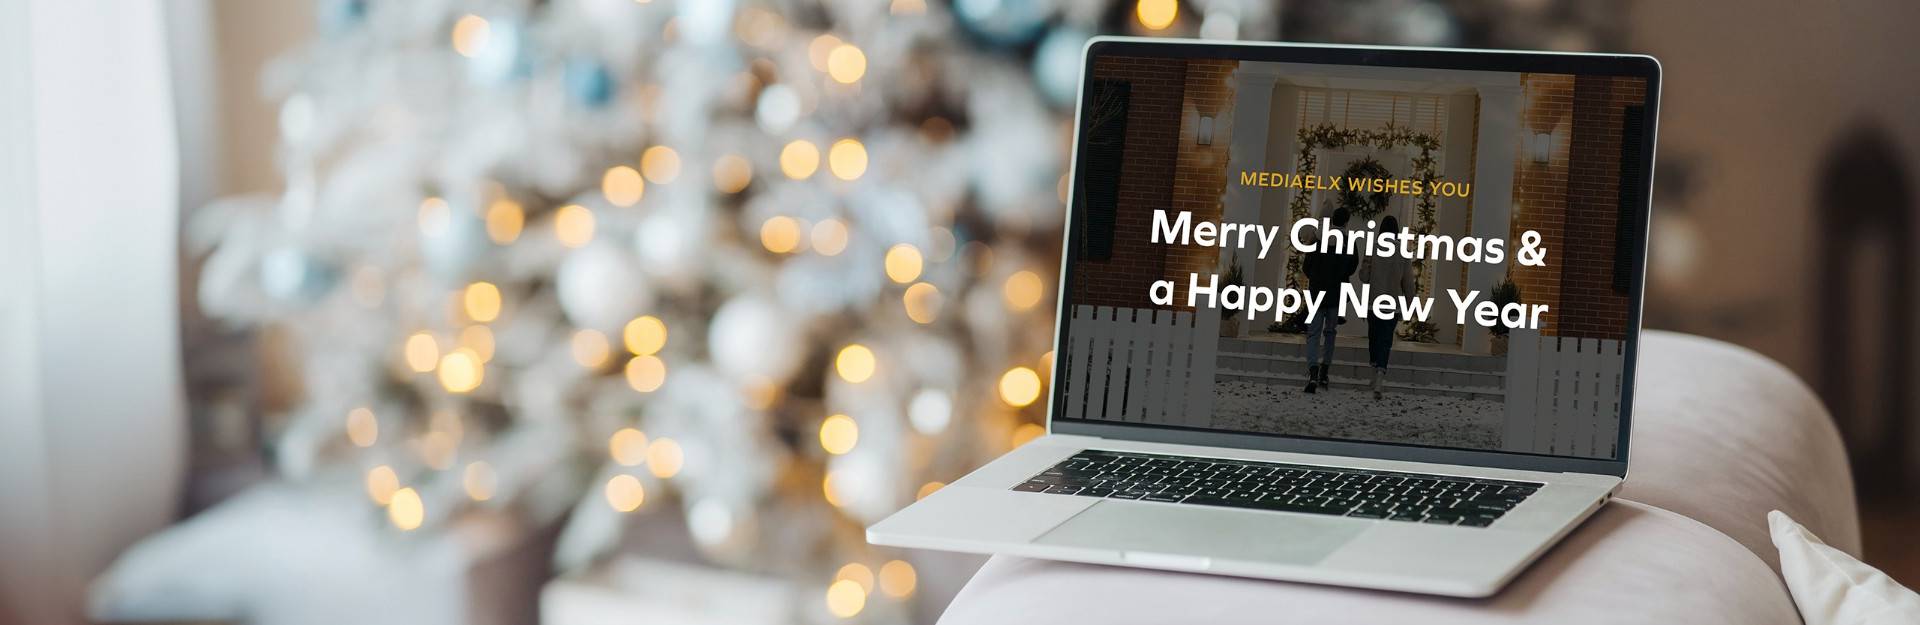 The Mediaelx team wishes you Happy Holidays